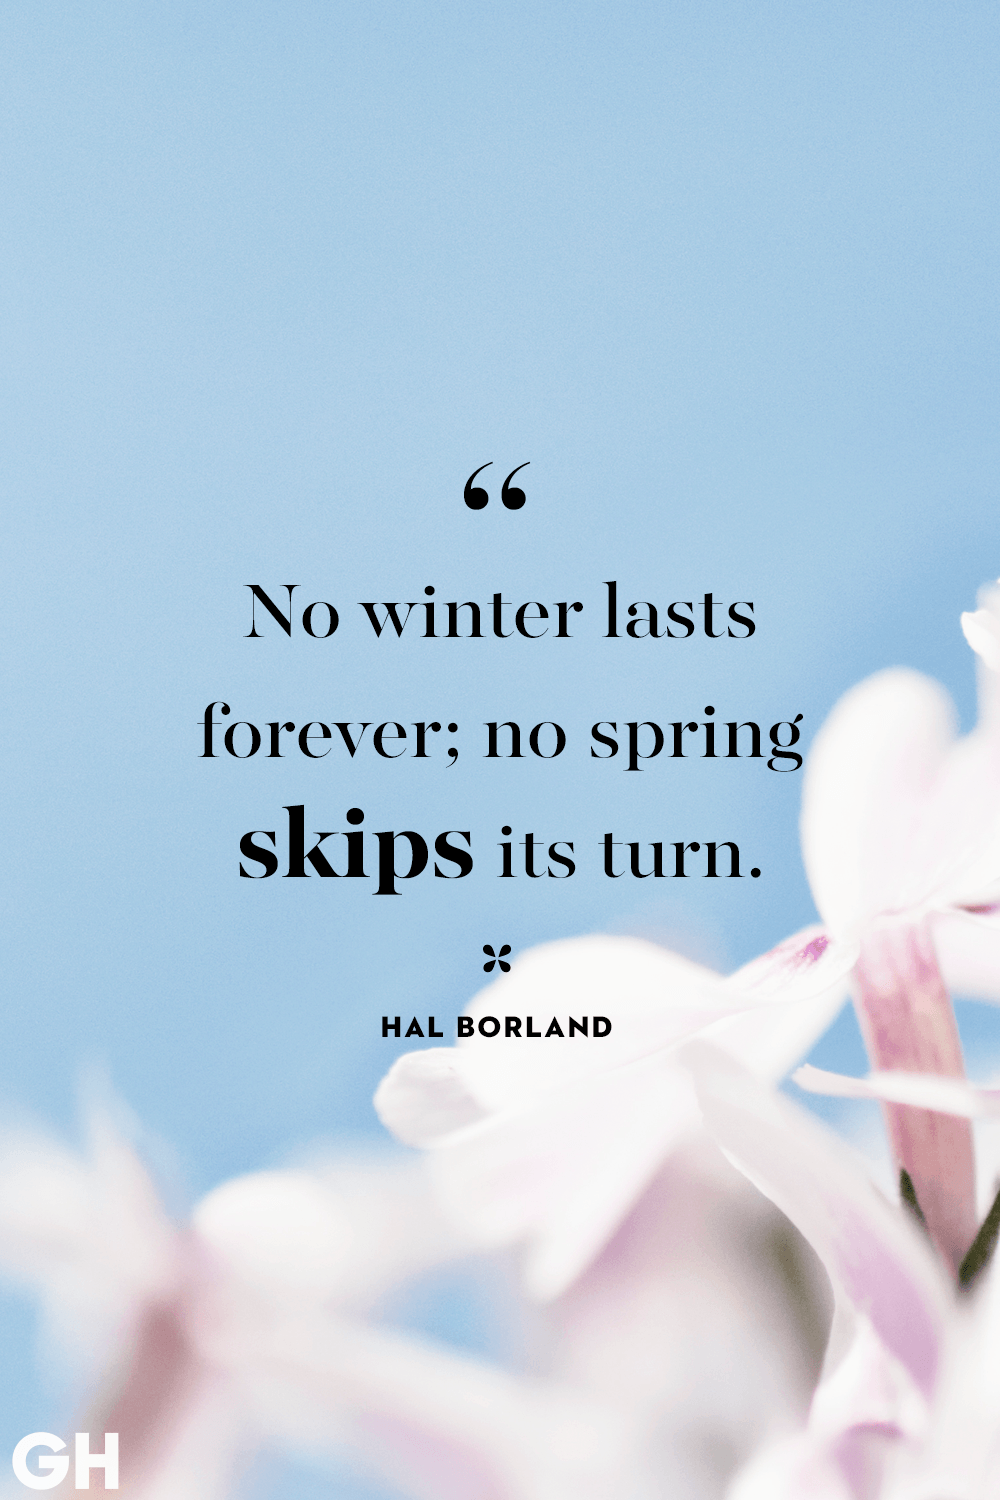 Happy Spring Quotes About Spring and Flowers